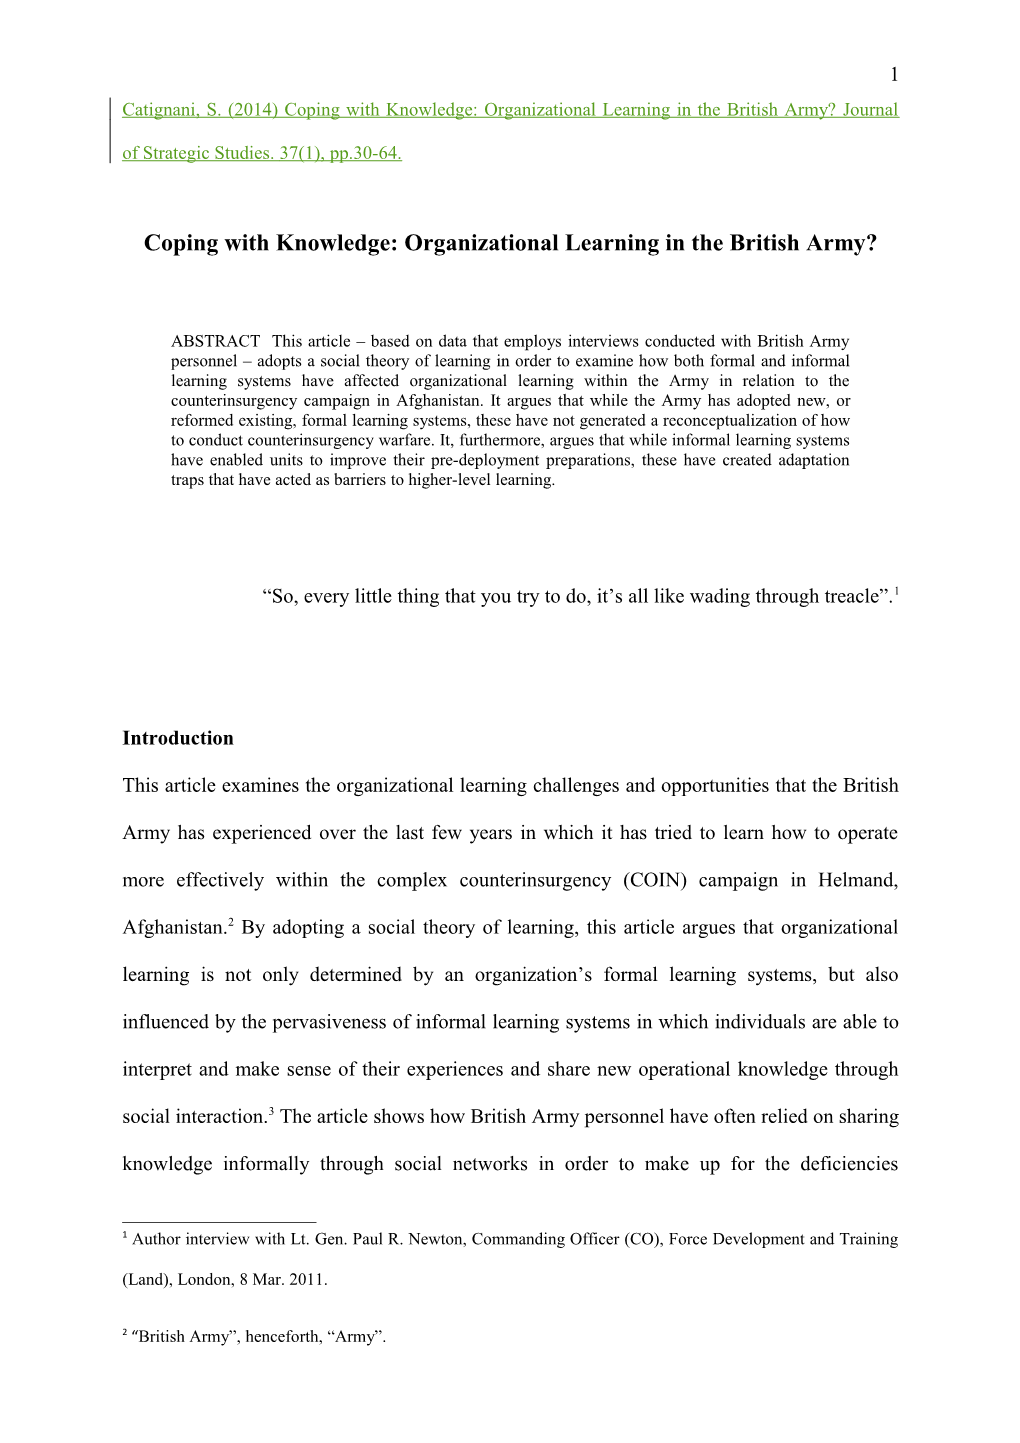 Coping with Knowledge: Organizational Learning in the British Army?